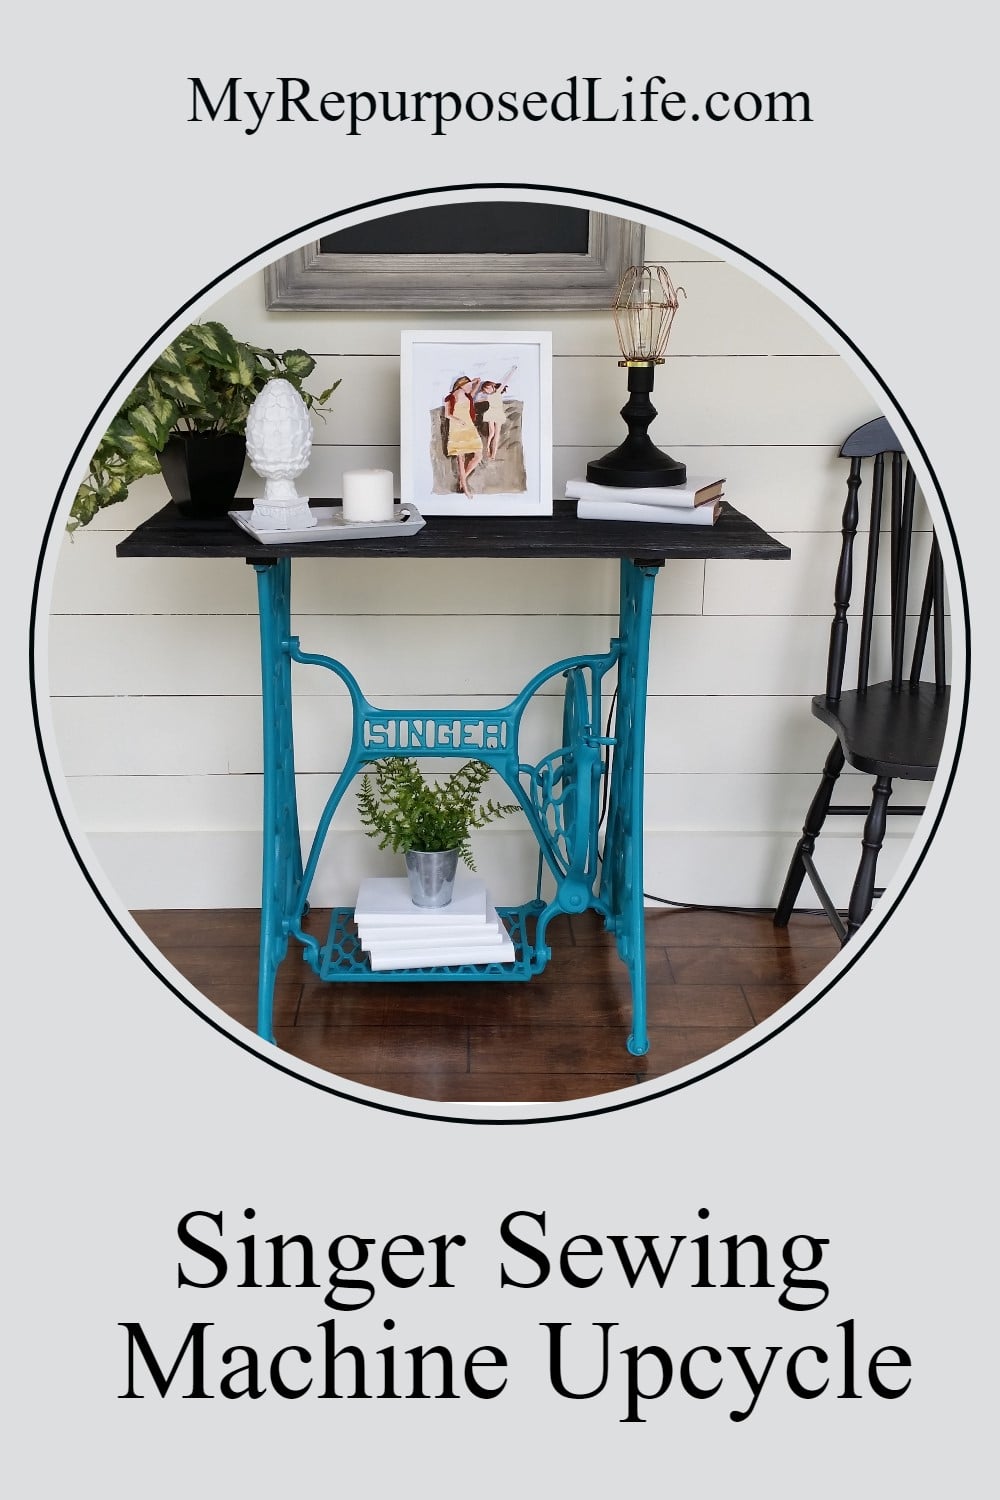 How to make a sofa table or hall table out of a singer sewing machine. Tips on painting and adding a table top. This is not for your grandma's sewing machine. This machine was in very rough shape. #MyRepurposedLife #repurposed #furniture #singer #sewingmachine via @repurposedlife